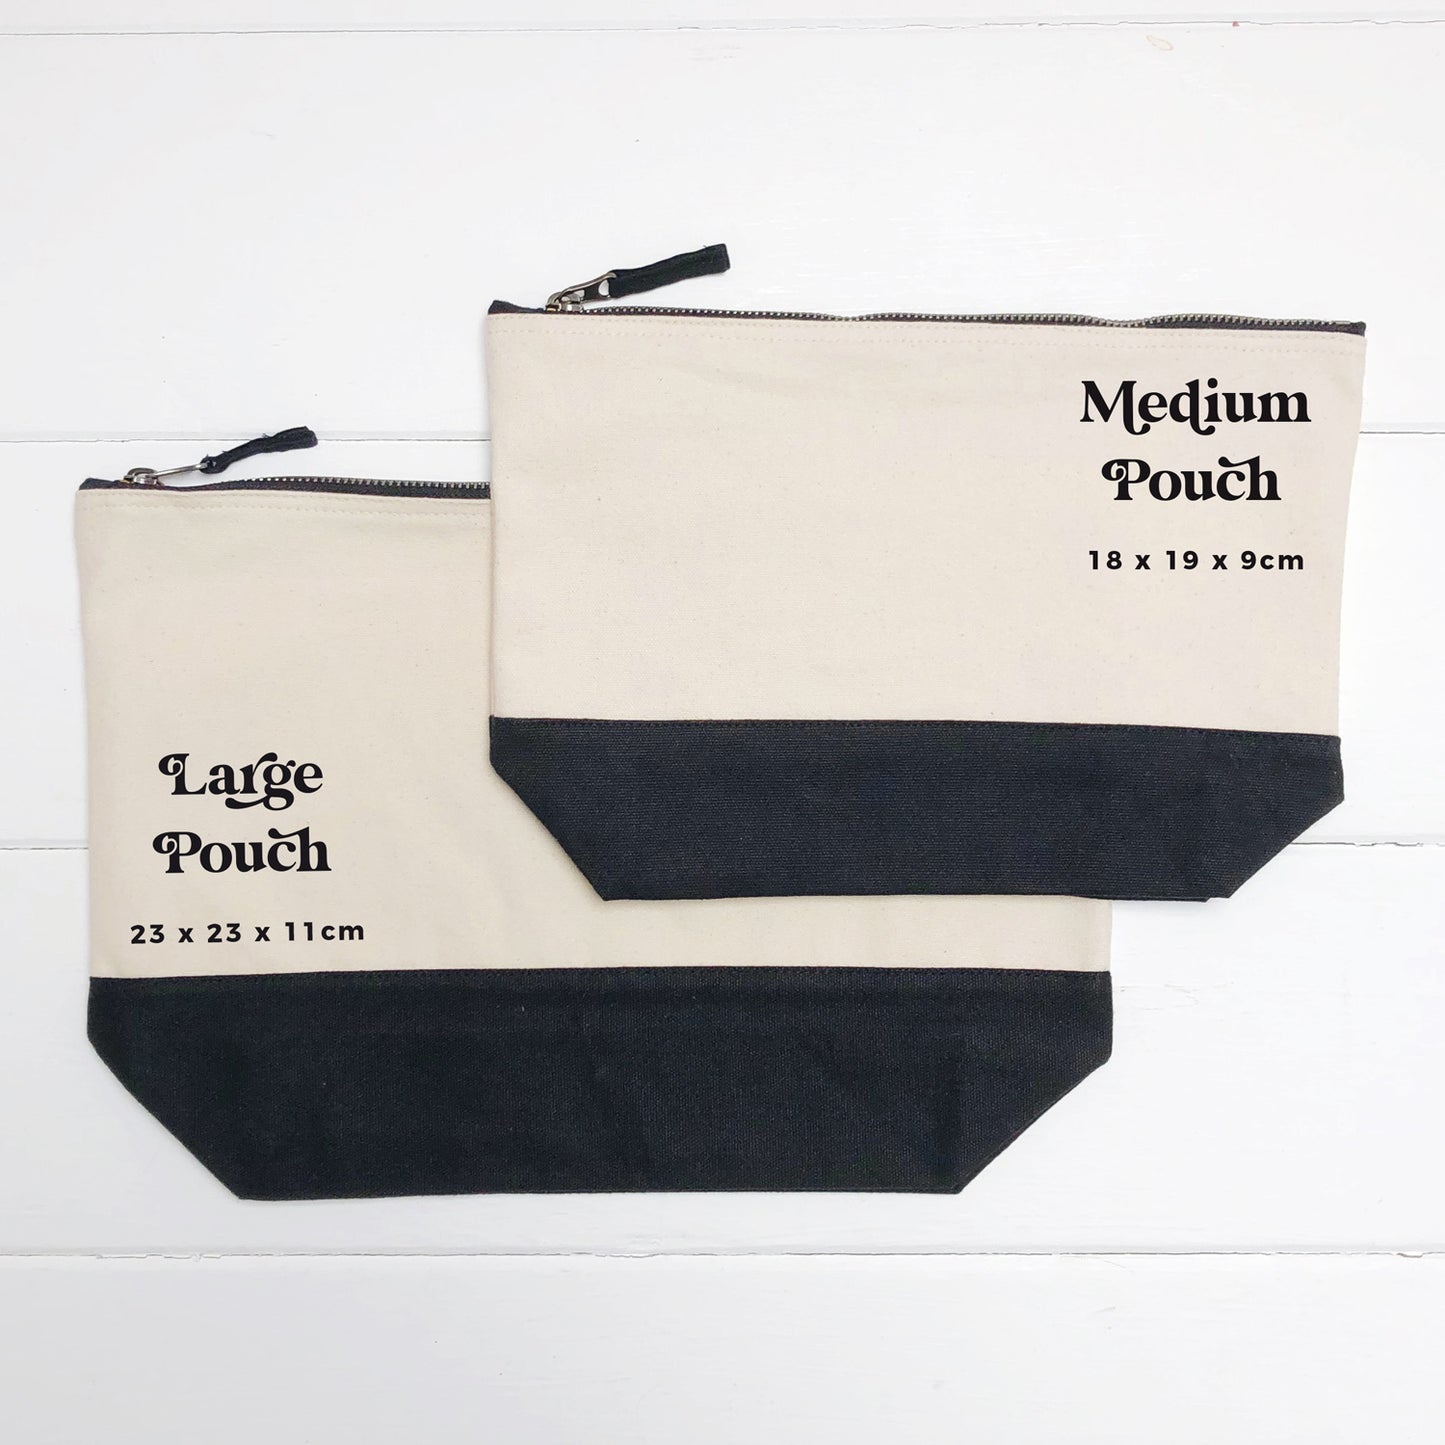 Medium and large project bags on top of each other to get an idea of sizing.